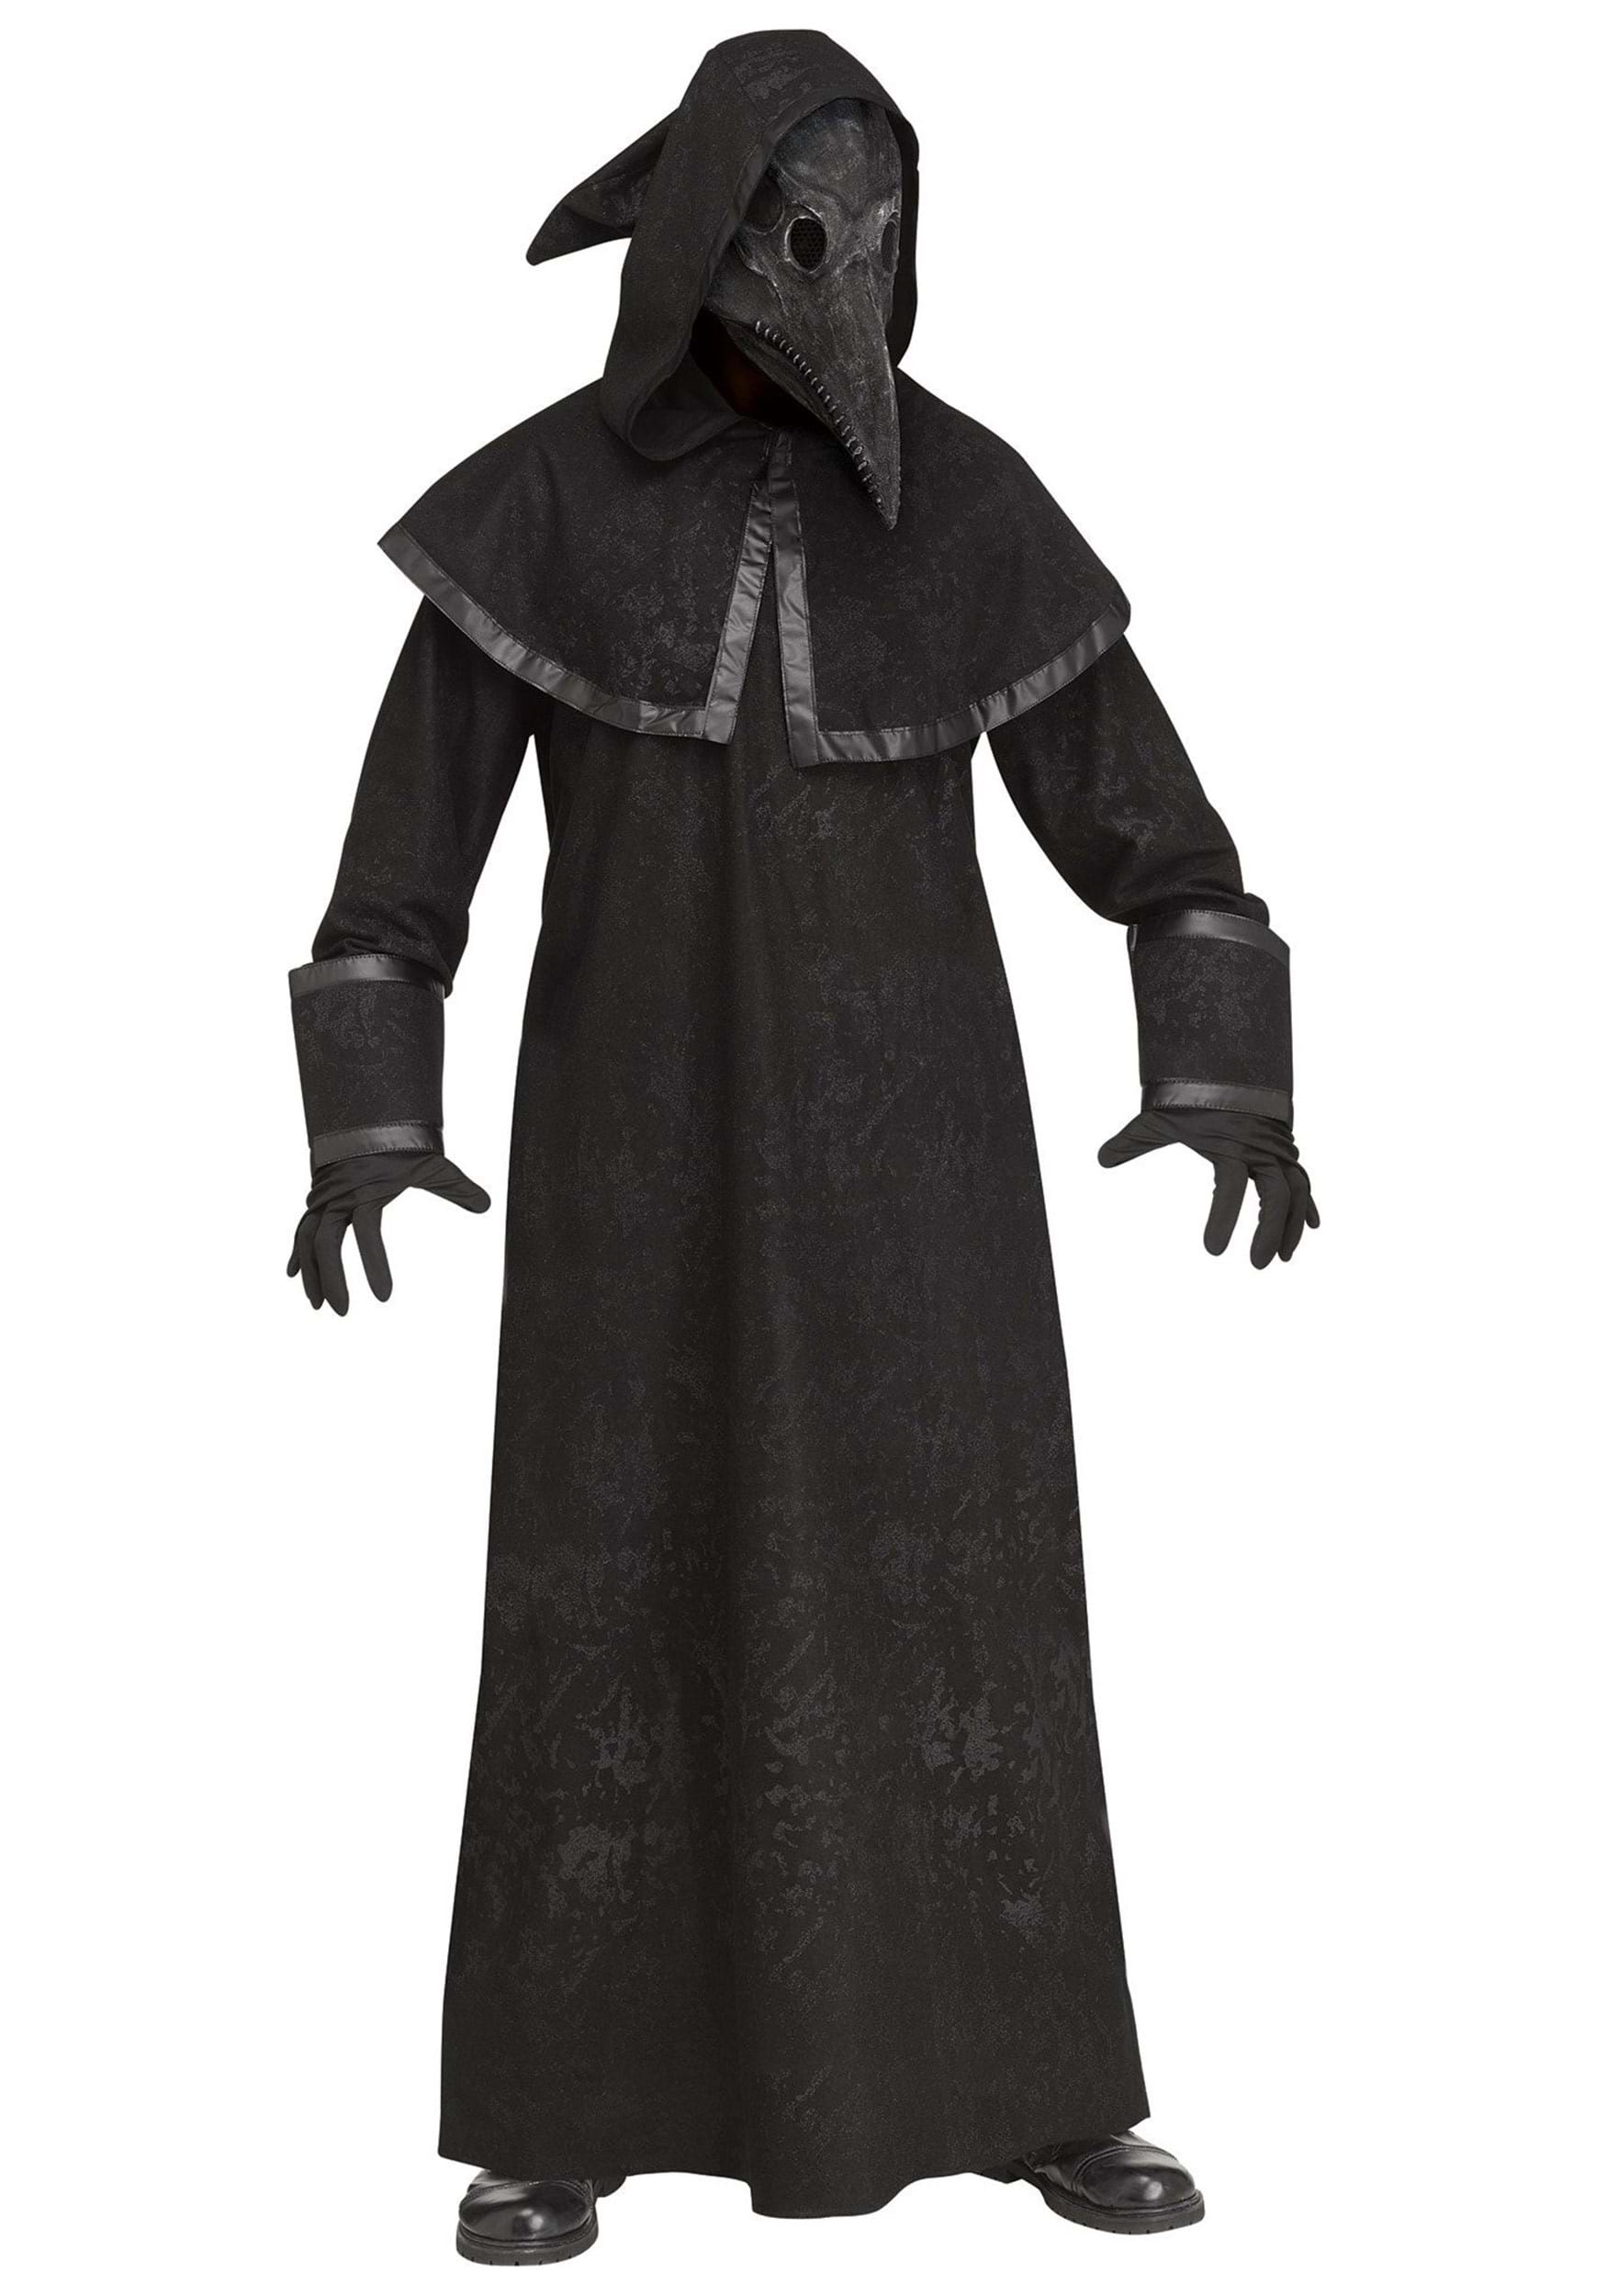 plague doctor outfit